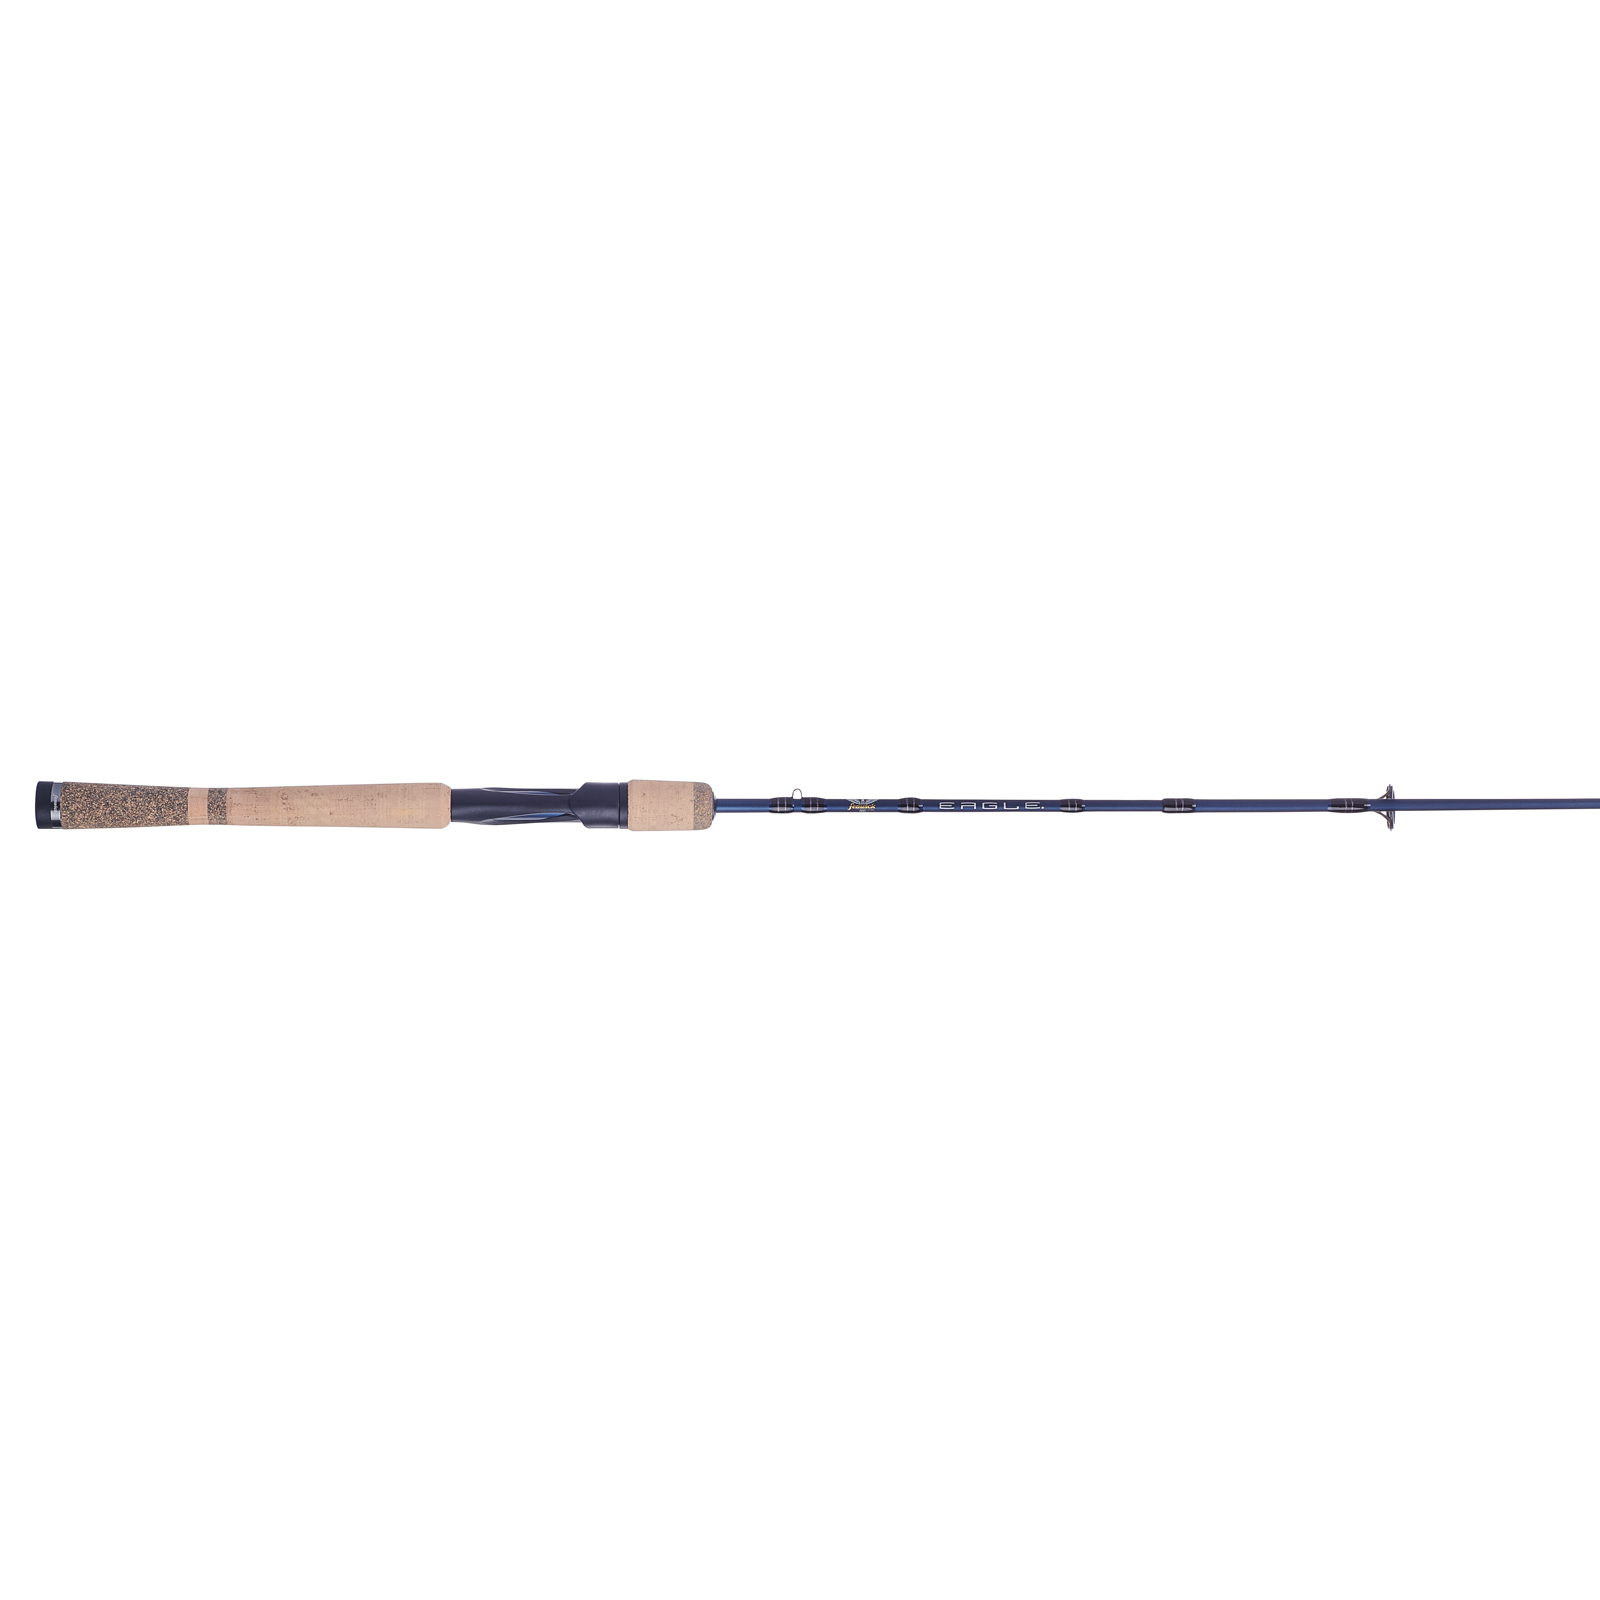 Fenwick Eagle Spinning Rod, Ultra-Light 4 Piece, Travel M/F Tapper 4-10lb,  24 Ton Graphite, Prem Cork, Tach Grip, SS Guide with Alum Oxite Insrts  EAG70ML-MFS-4 with Free S&H — CampSaver